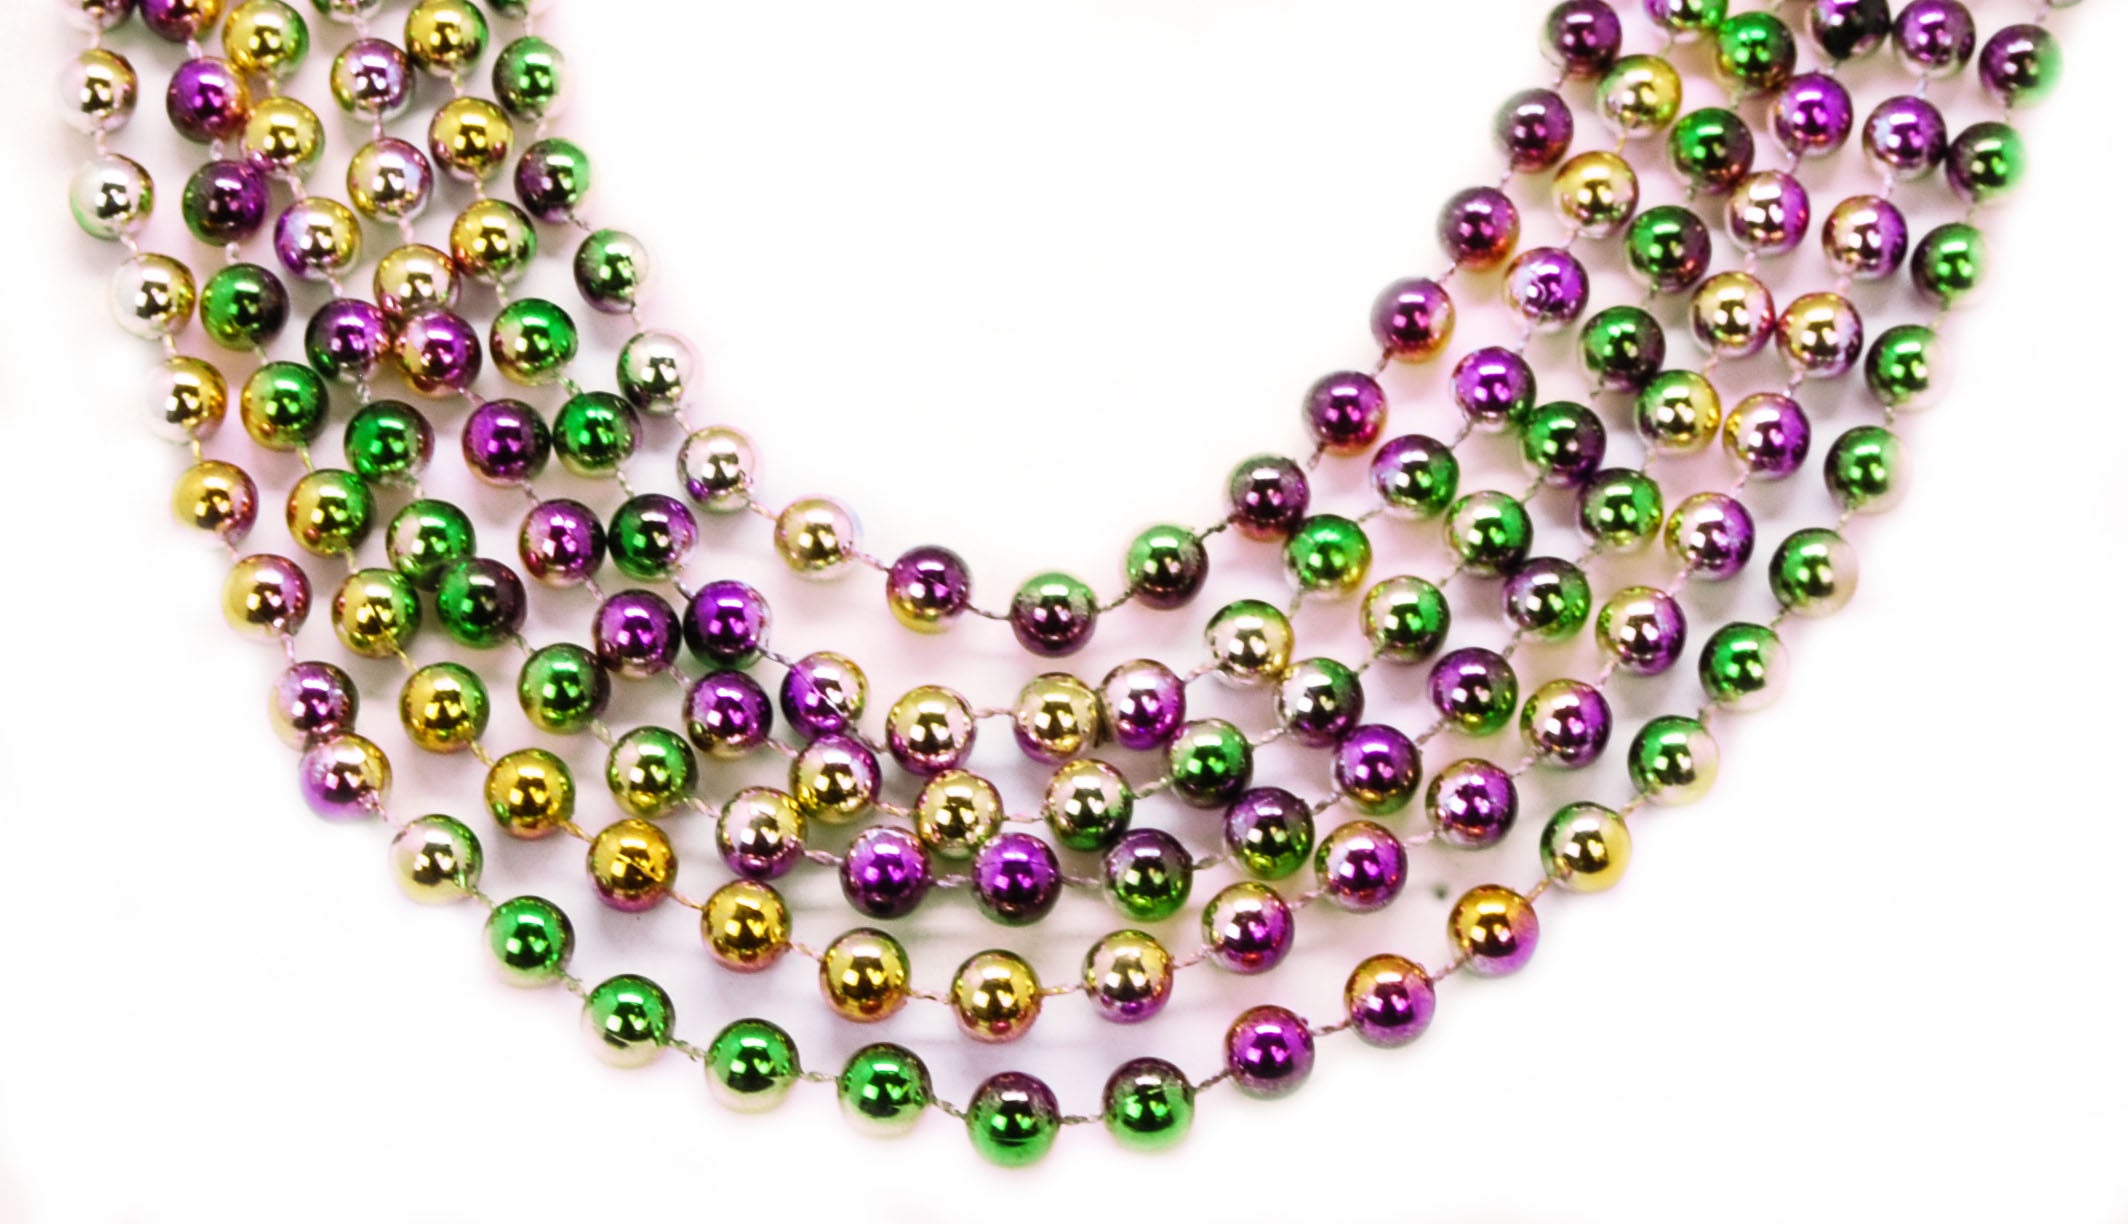 Multicolor Party Beads (48 per bag)